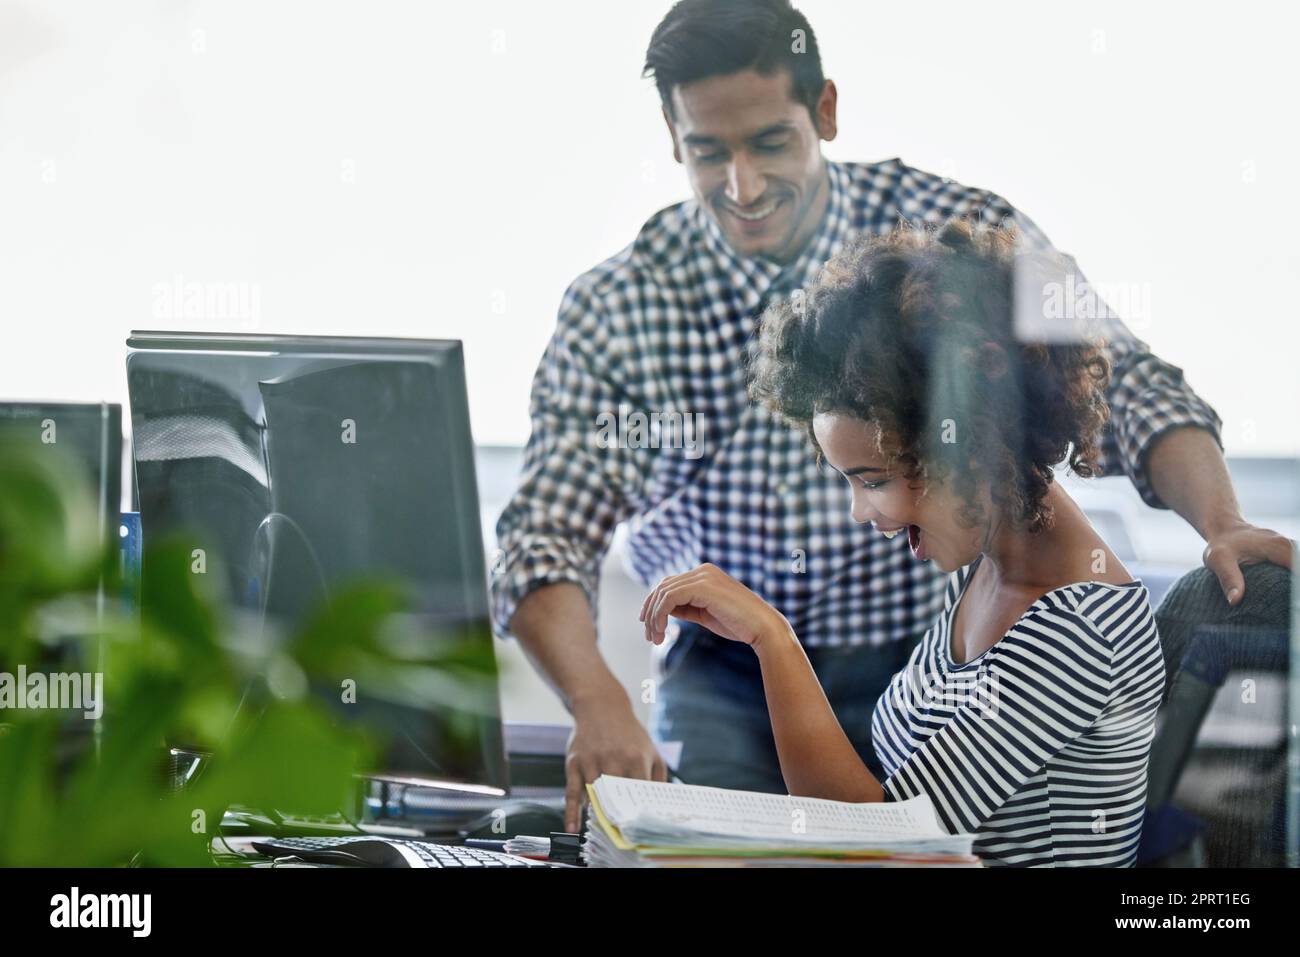 Giving her the good news. two young designers working on a pc. Stock Photo